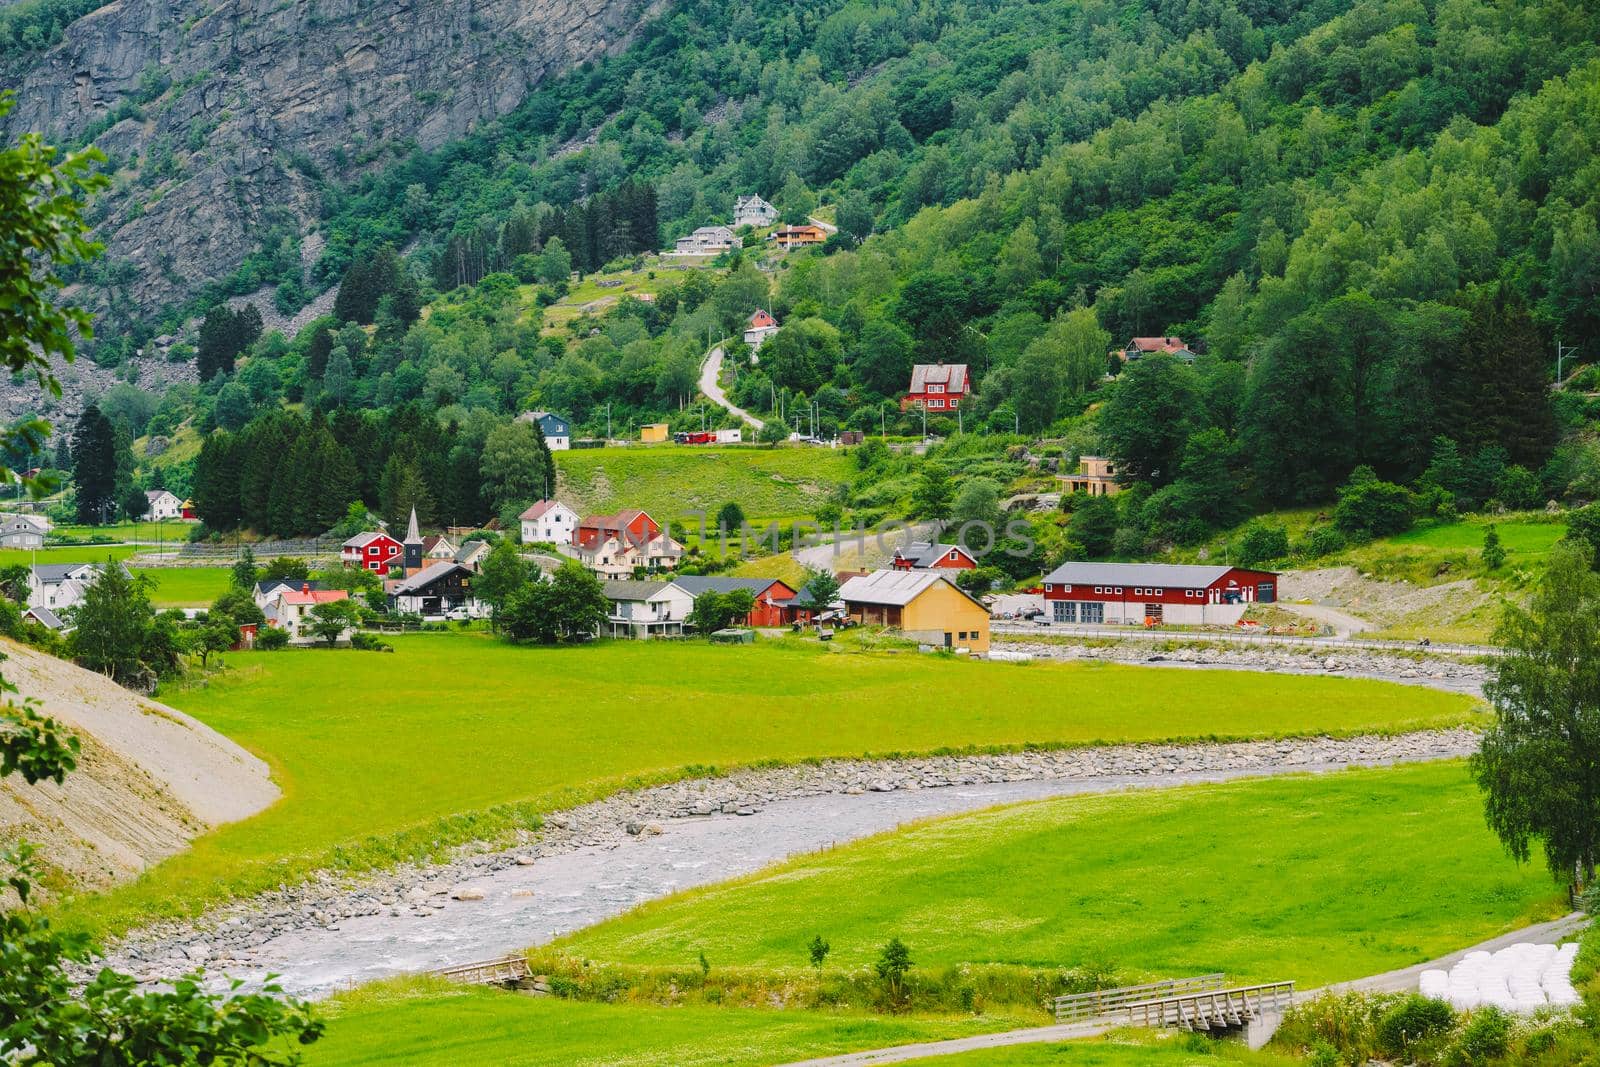 Norway mountain landscape with country houses. Aerial view of the Norwegian village Flam. village of Flam laying on the banks of the river Flam in Norway by Tomashevska